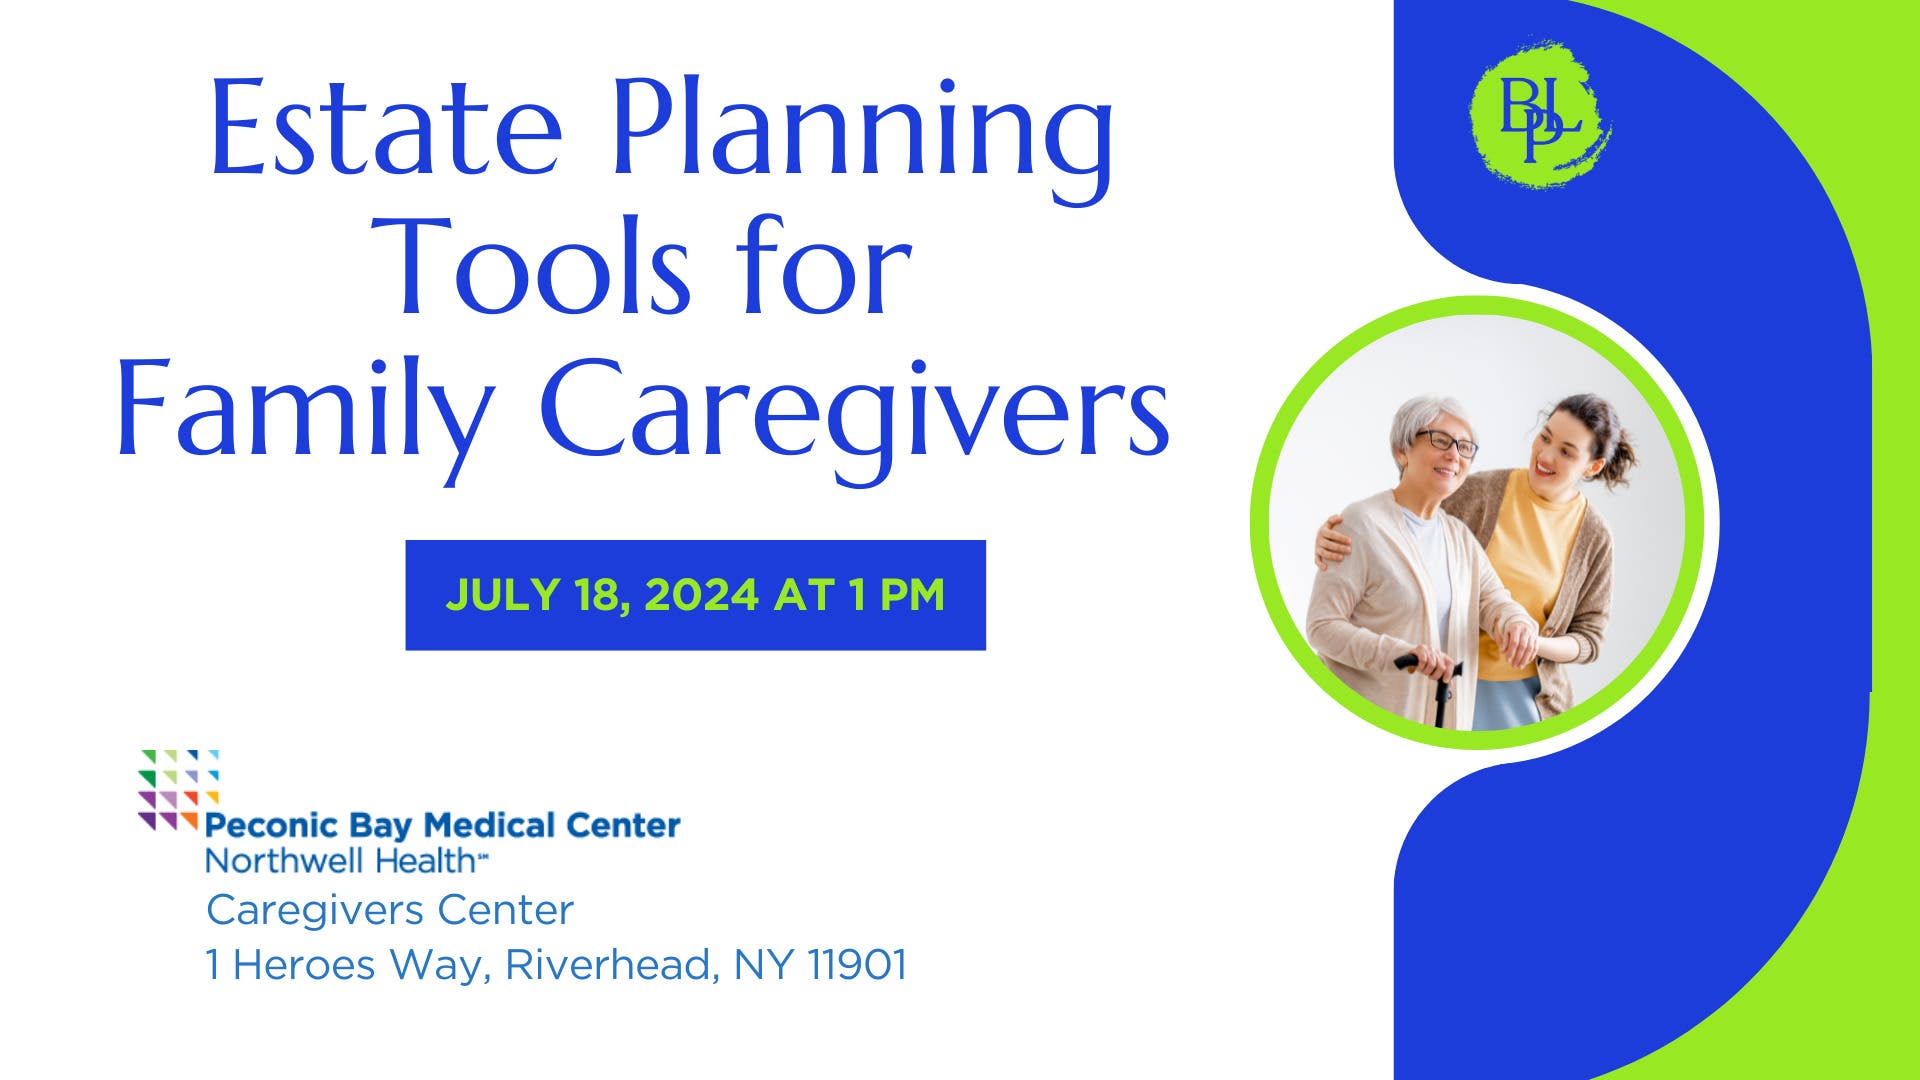 Estate Planning Tools for Family Caregivers